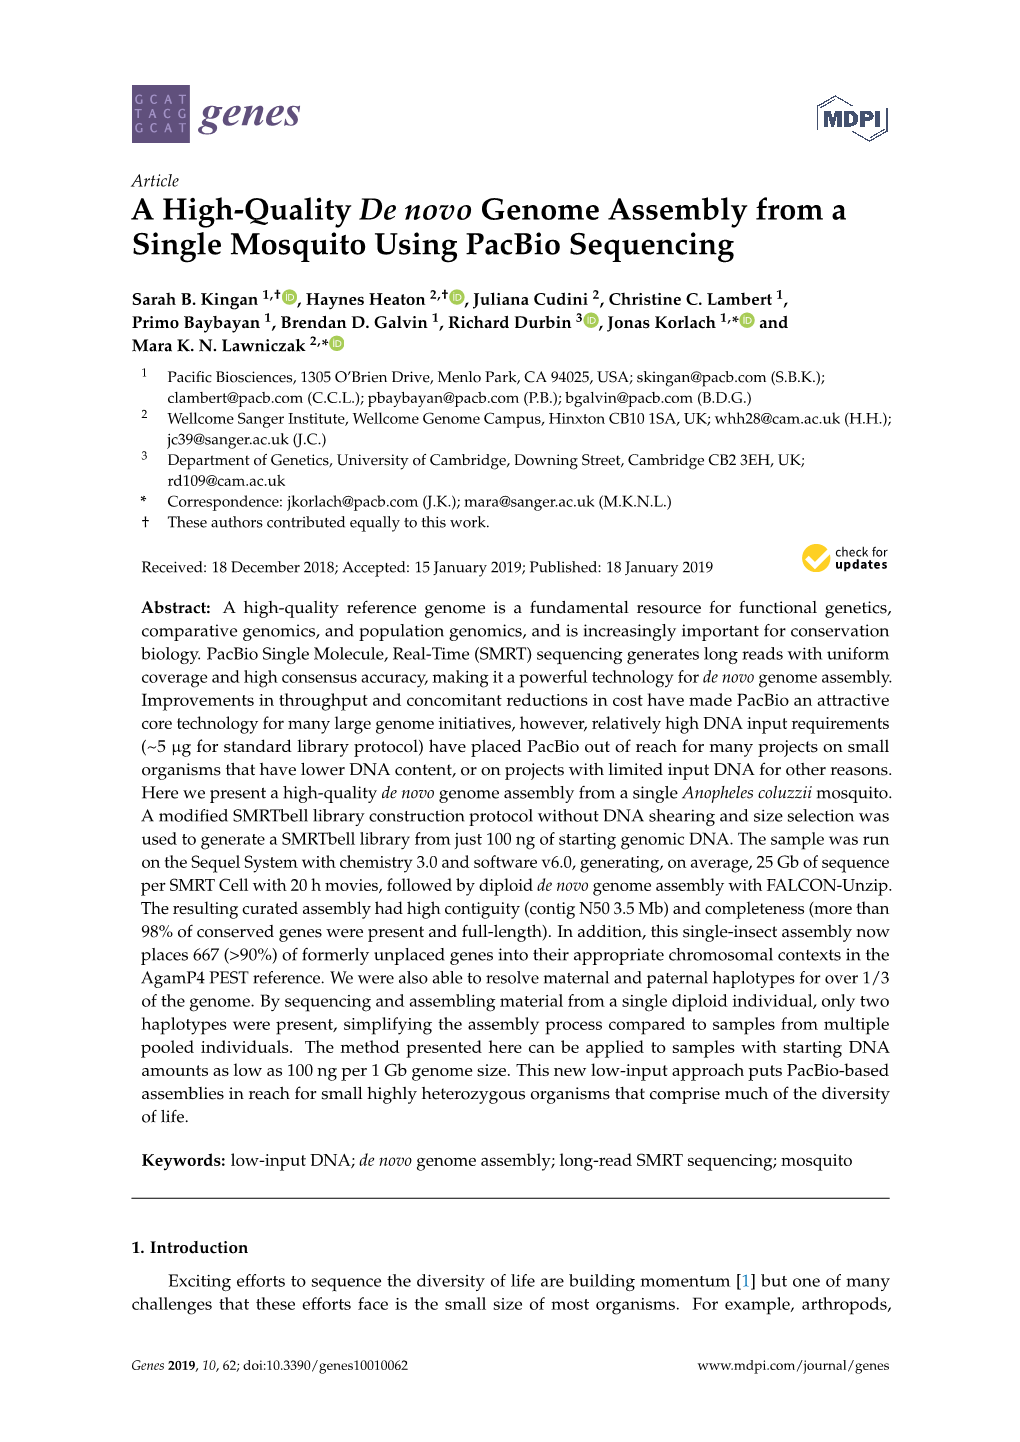 A High-Quality De Novo Genome Assembly from a Single Mosquito Using Pacbio Sequencing